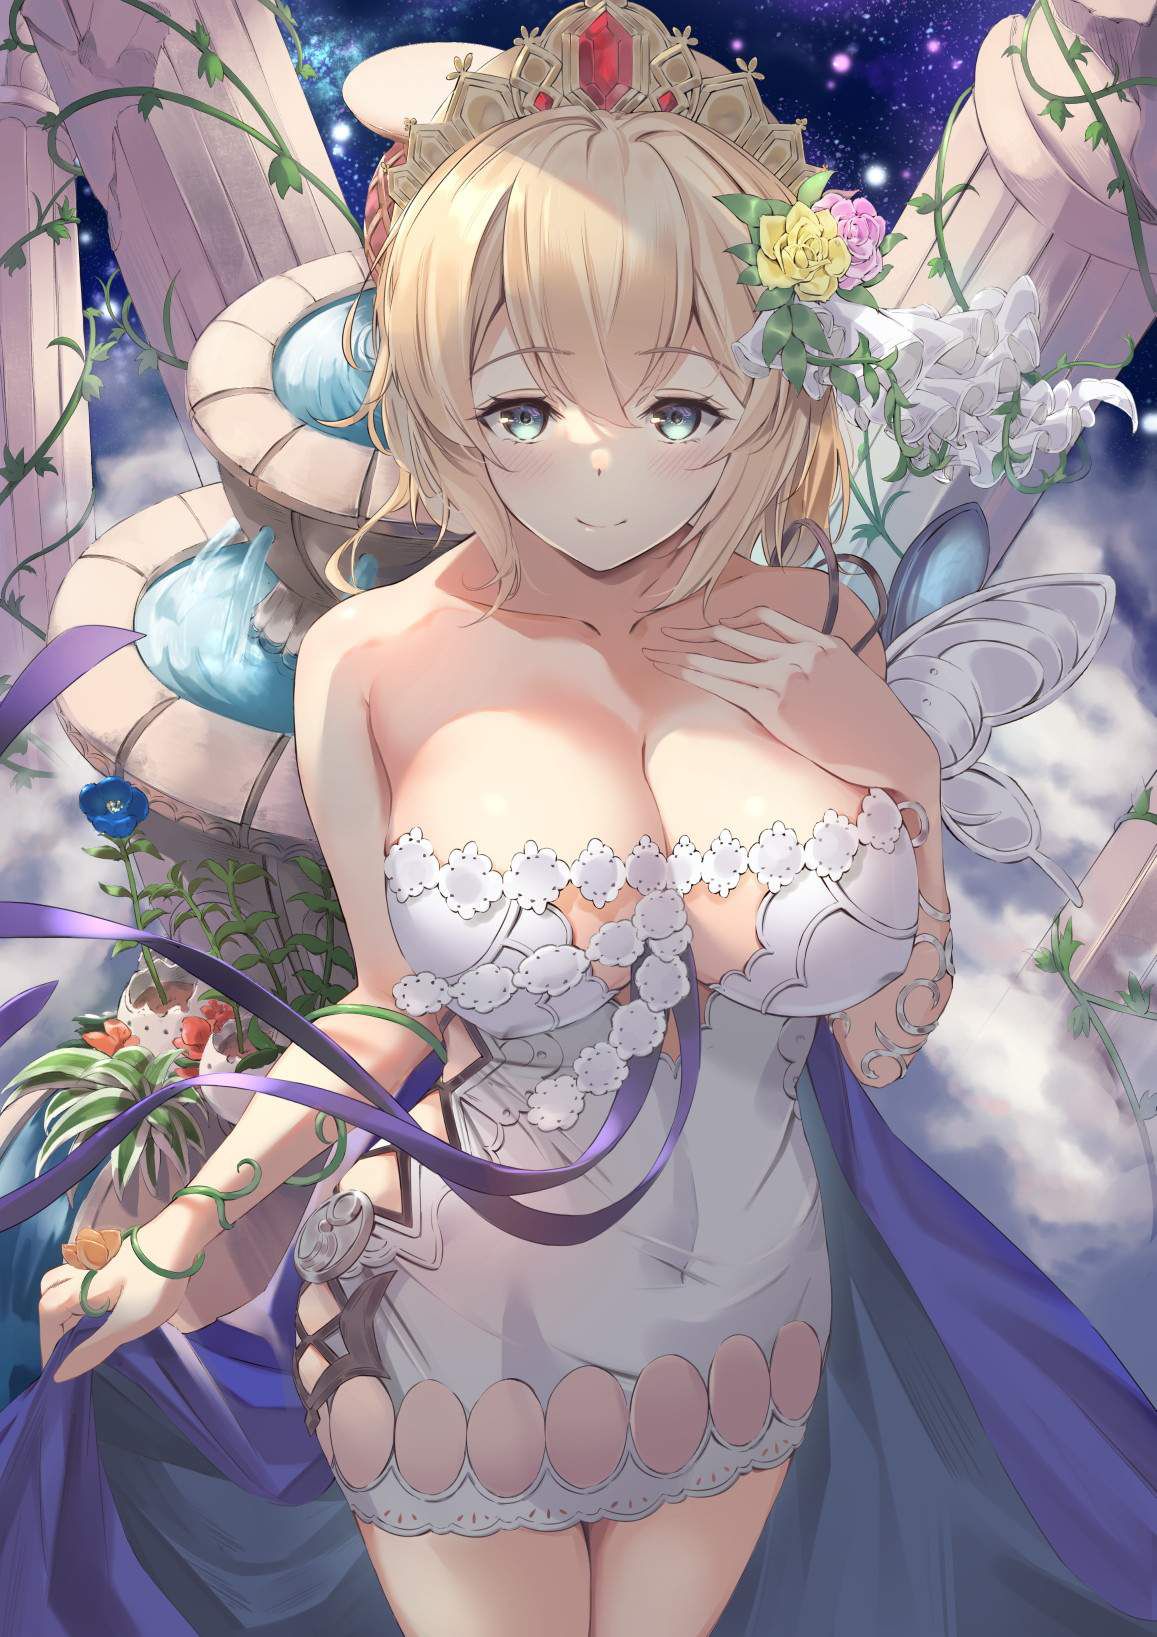 It is an erotic image of Granblue Fantasy! 14